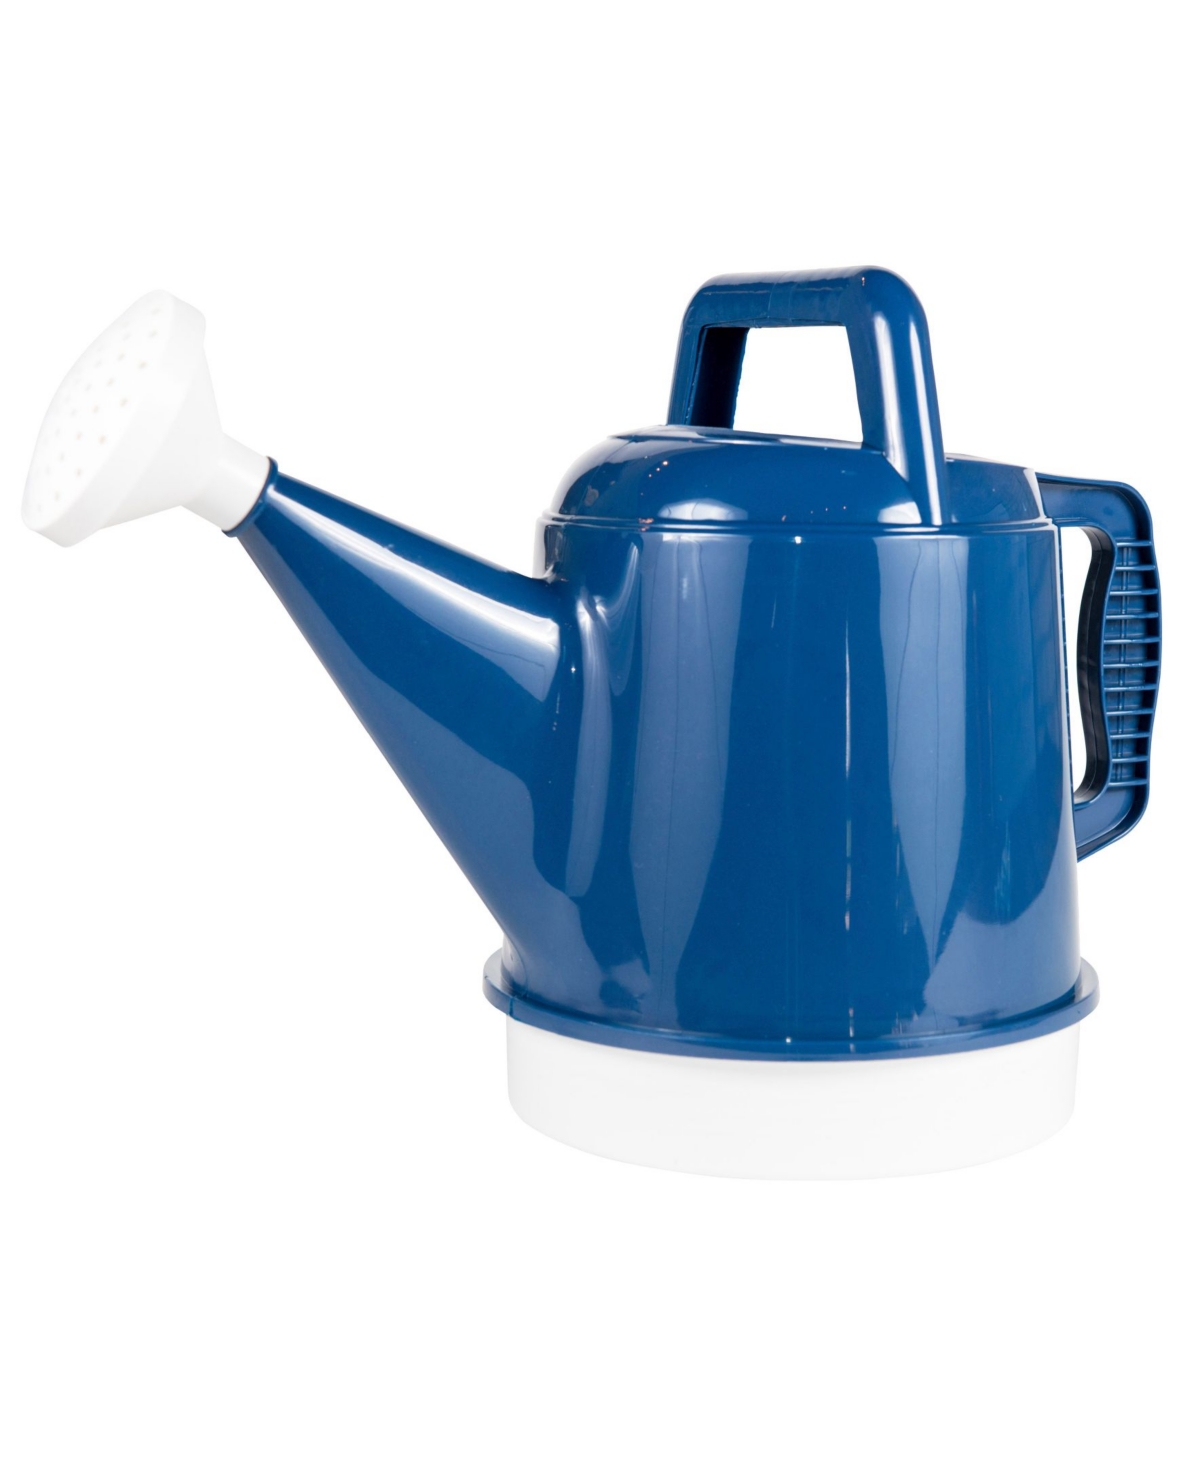 Deluxe Plastic Watering Can, Classic Blue, 2.5 Gallon - Blue